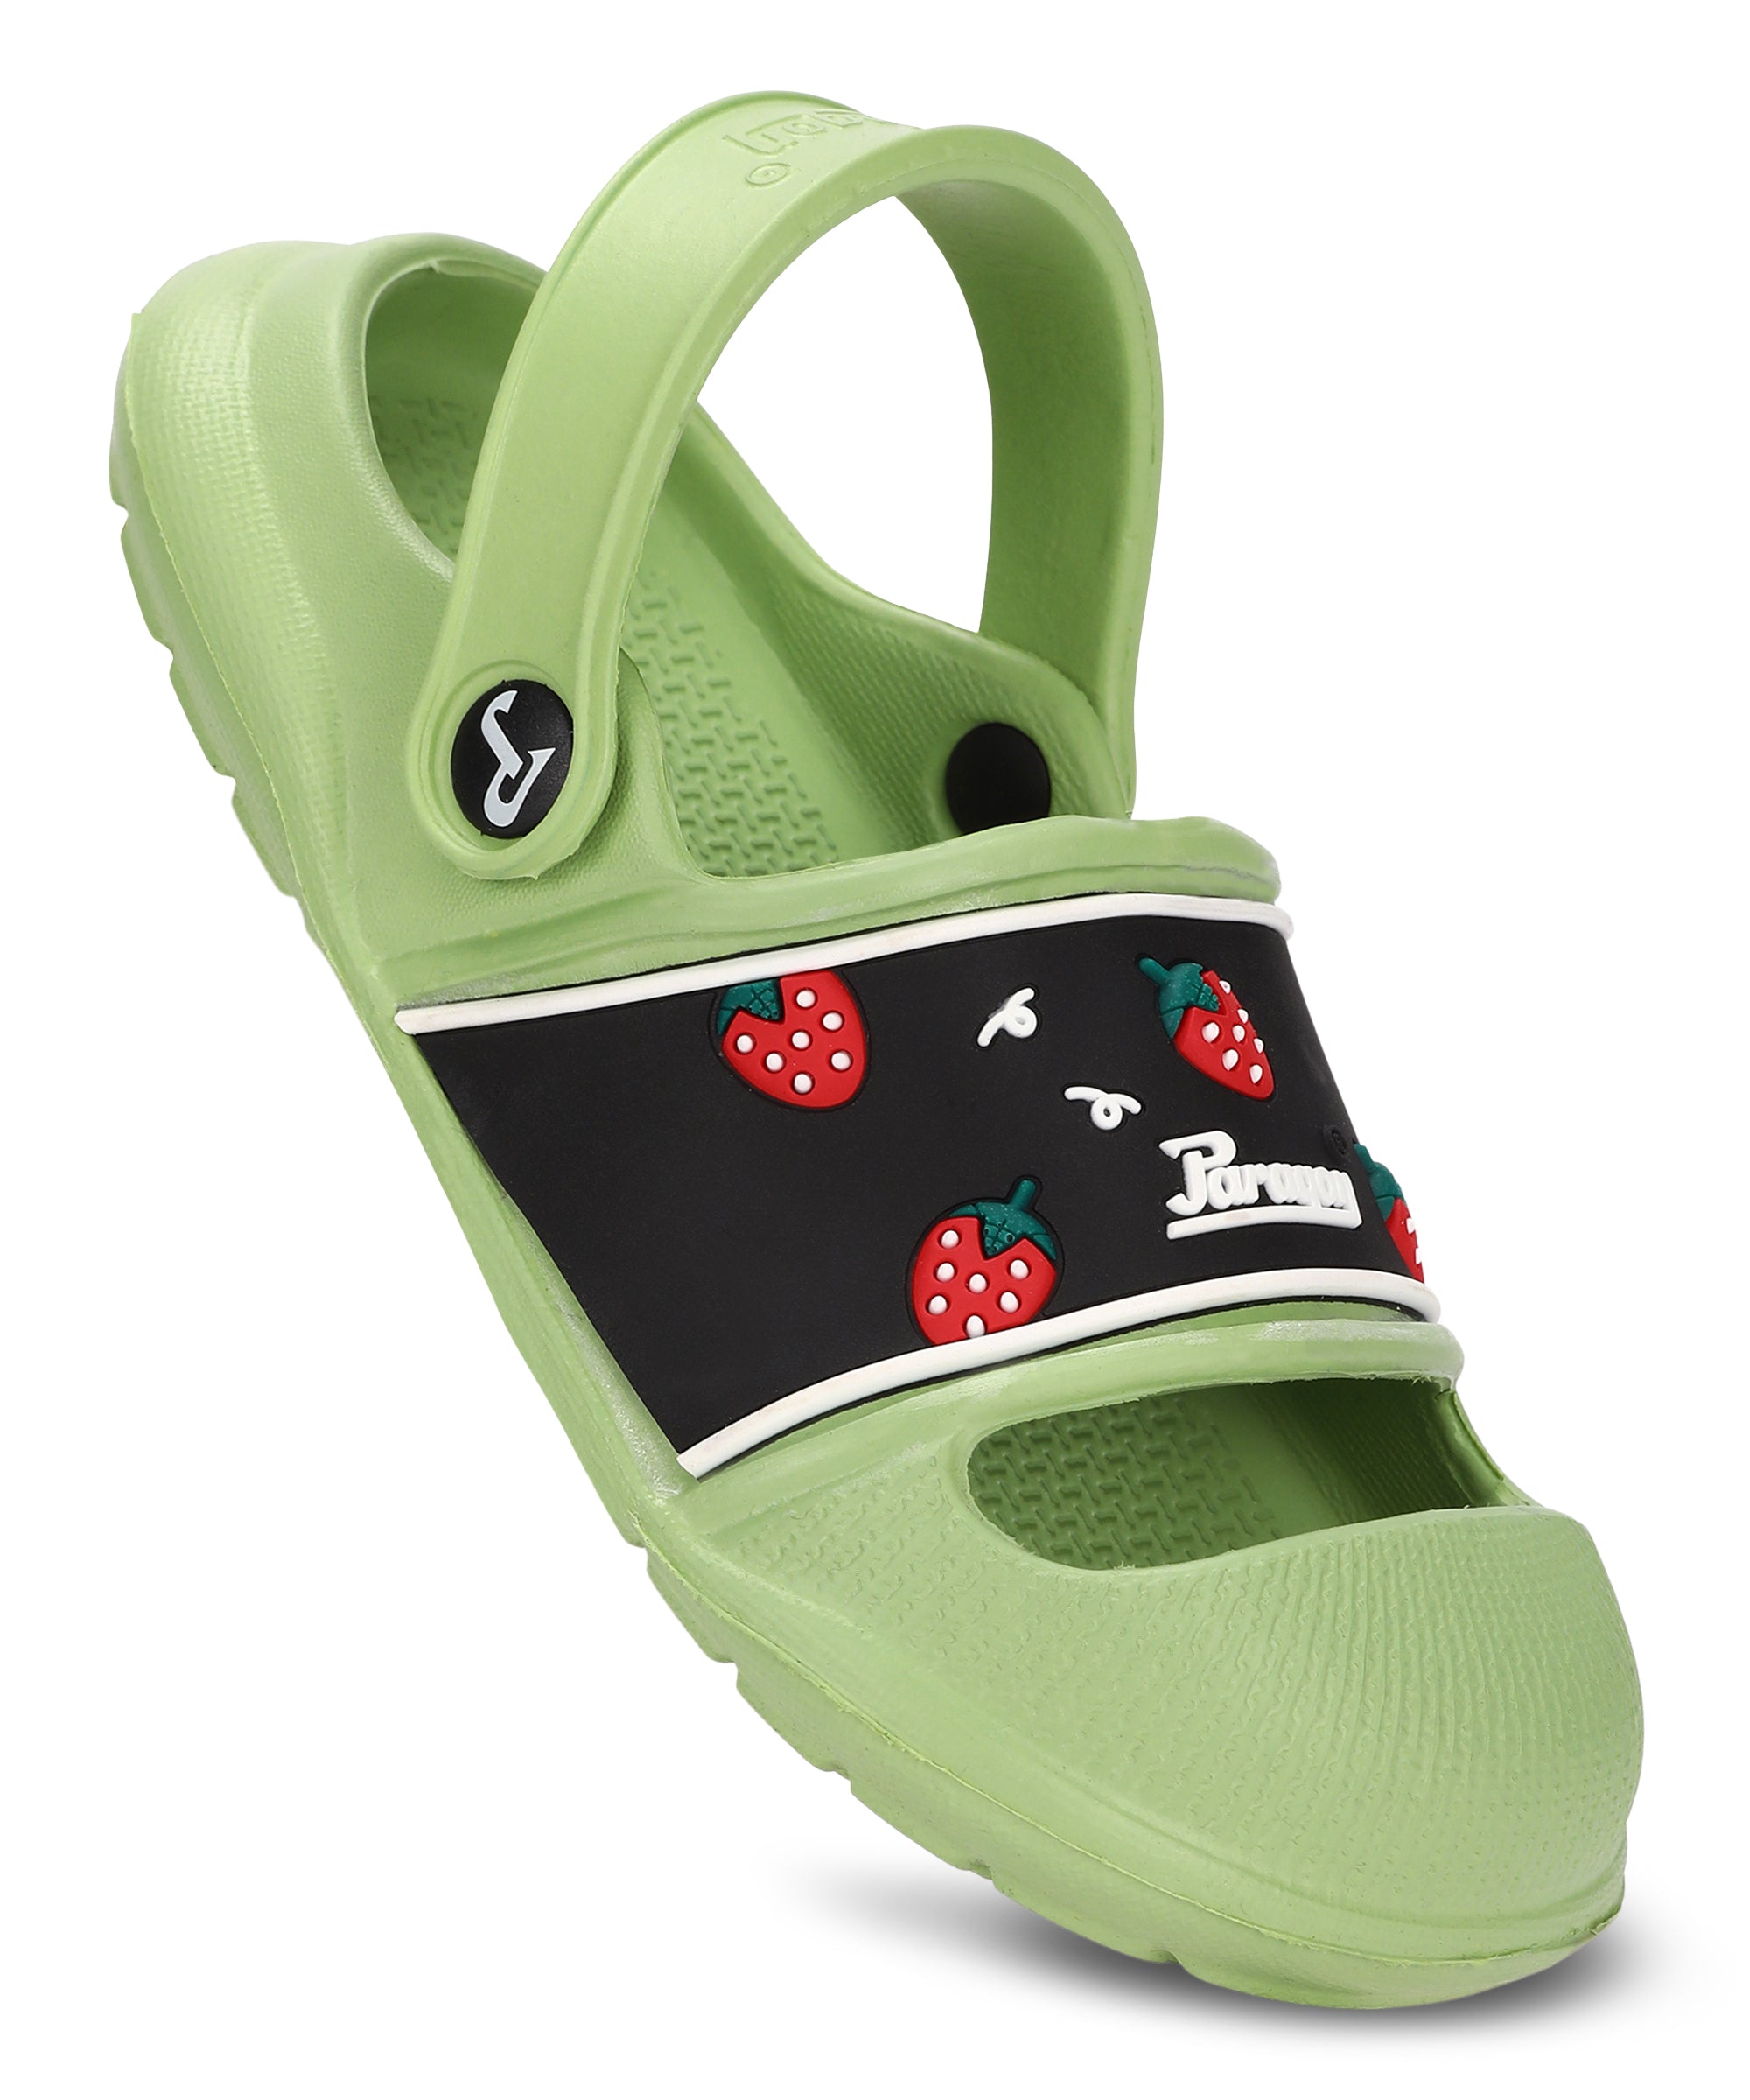 Paragon EVK8000C Kids Casual Fashion Clogs | Comfortable Trendy Outdoor Indoor Clogs for Boys &amp; Girls